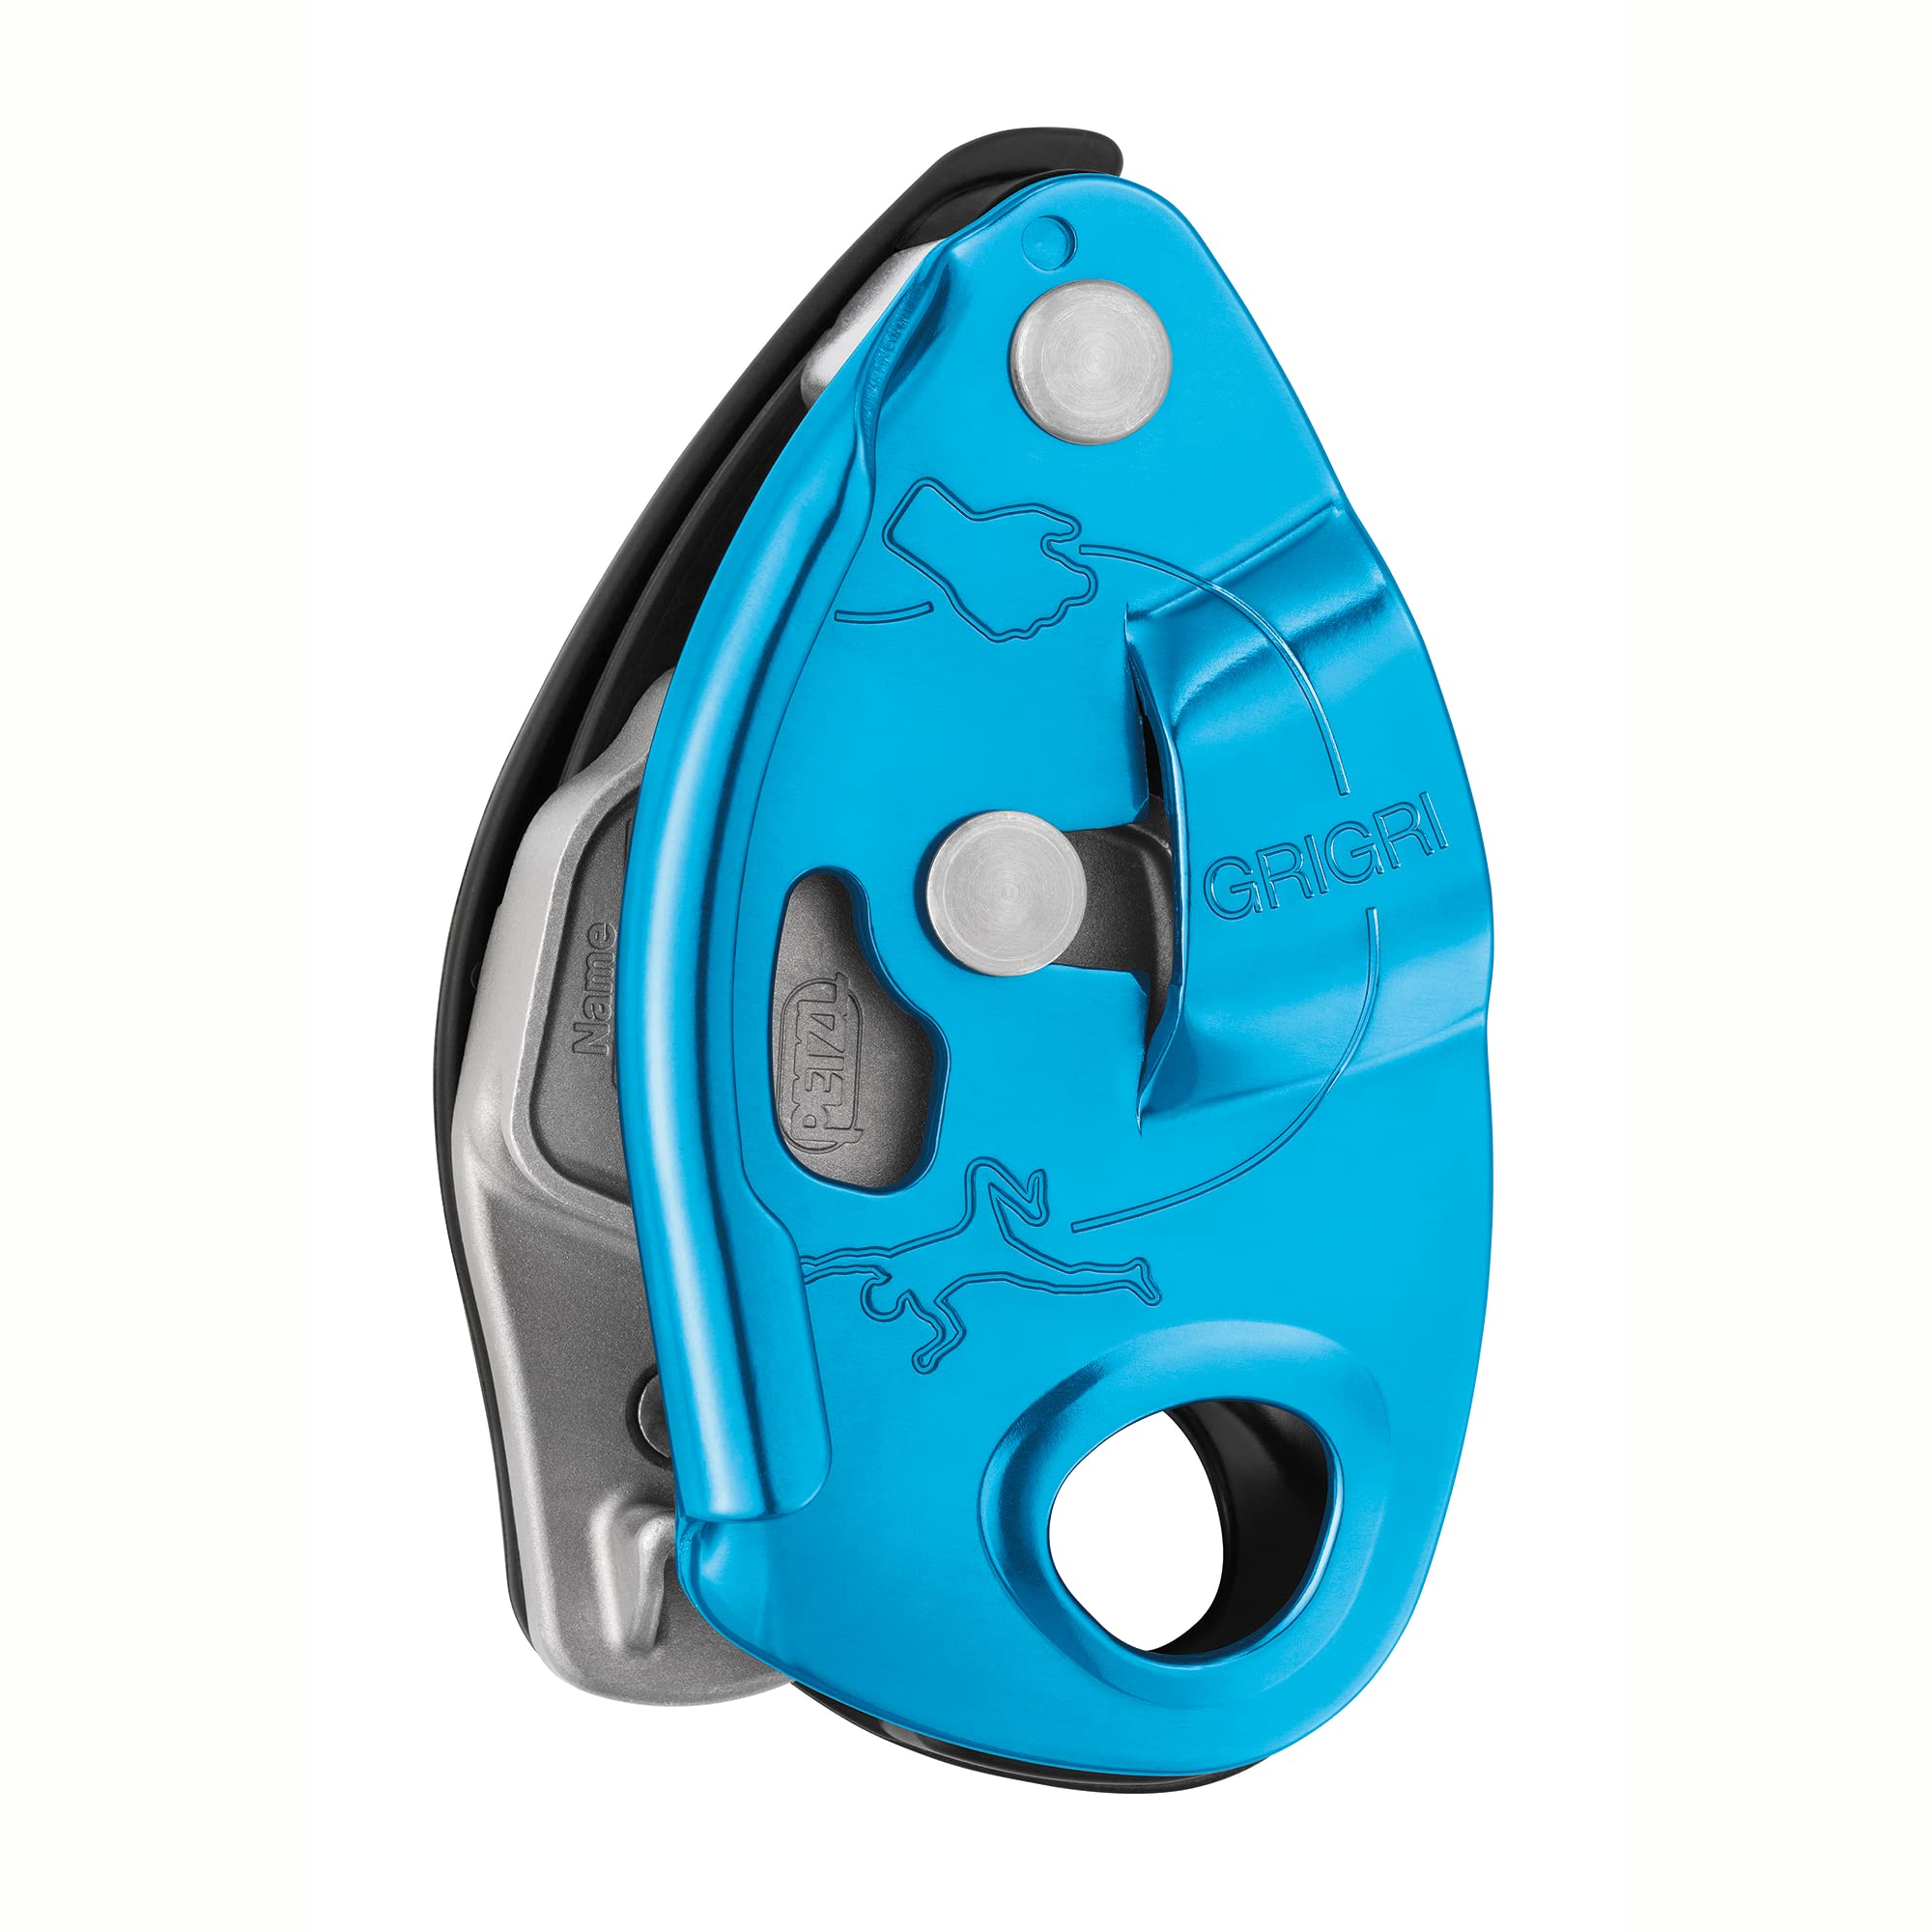  Petzl GRIGRI Belay Device - Belay Device With Cam-Assisted  Blocking for Sport, Trad, and Top-Rope Climbing - Blue : Sports & Outdoors